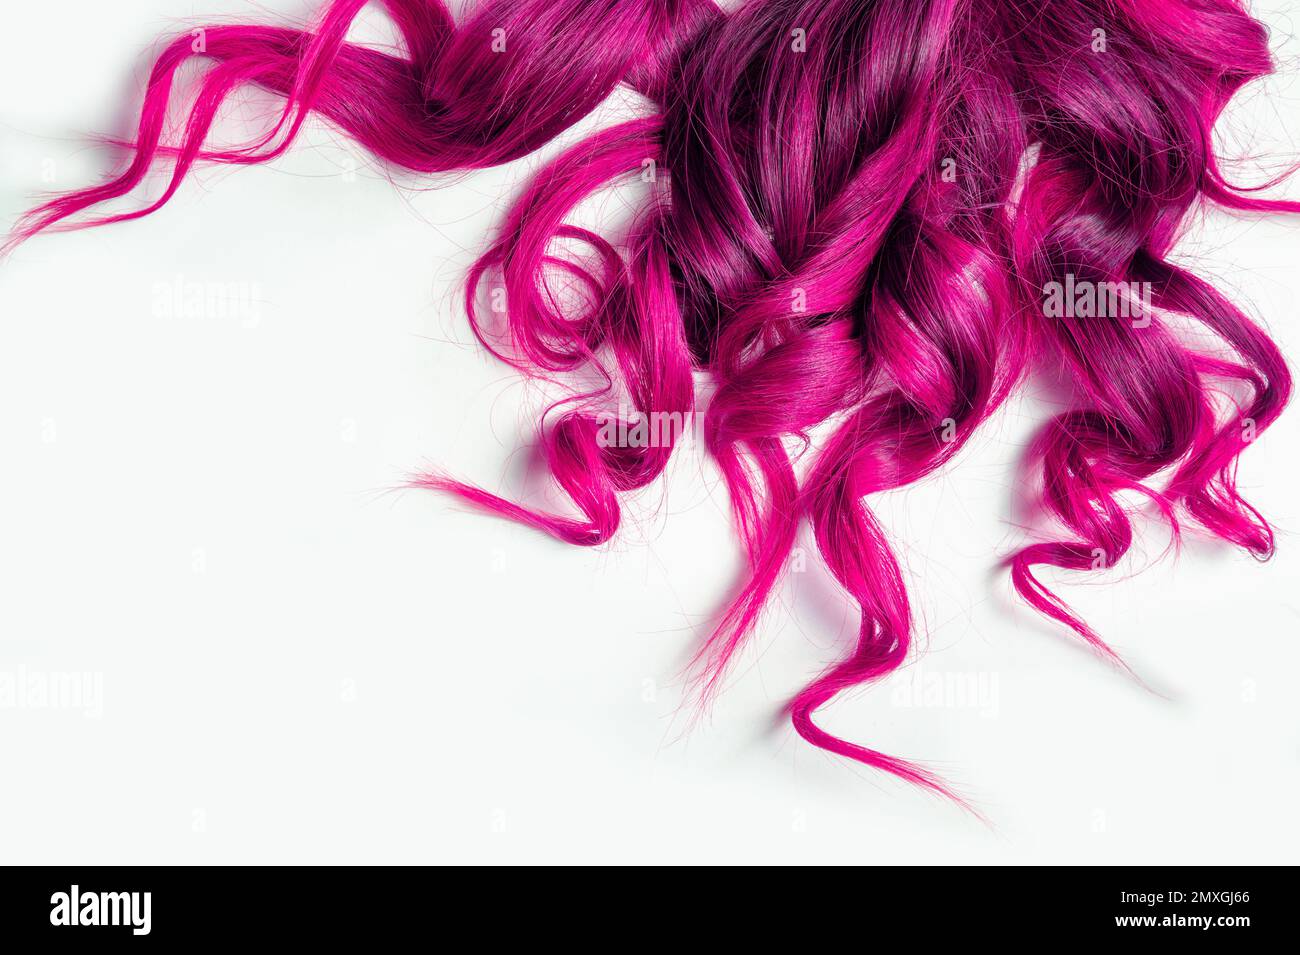 long pink curly hair on isolated white background . Stock Photo